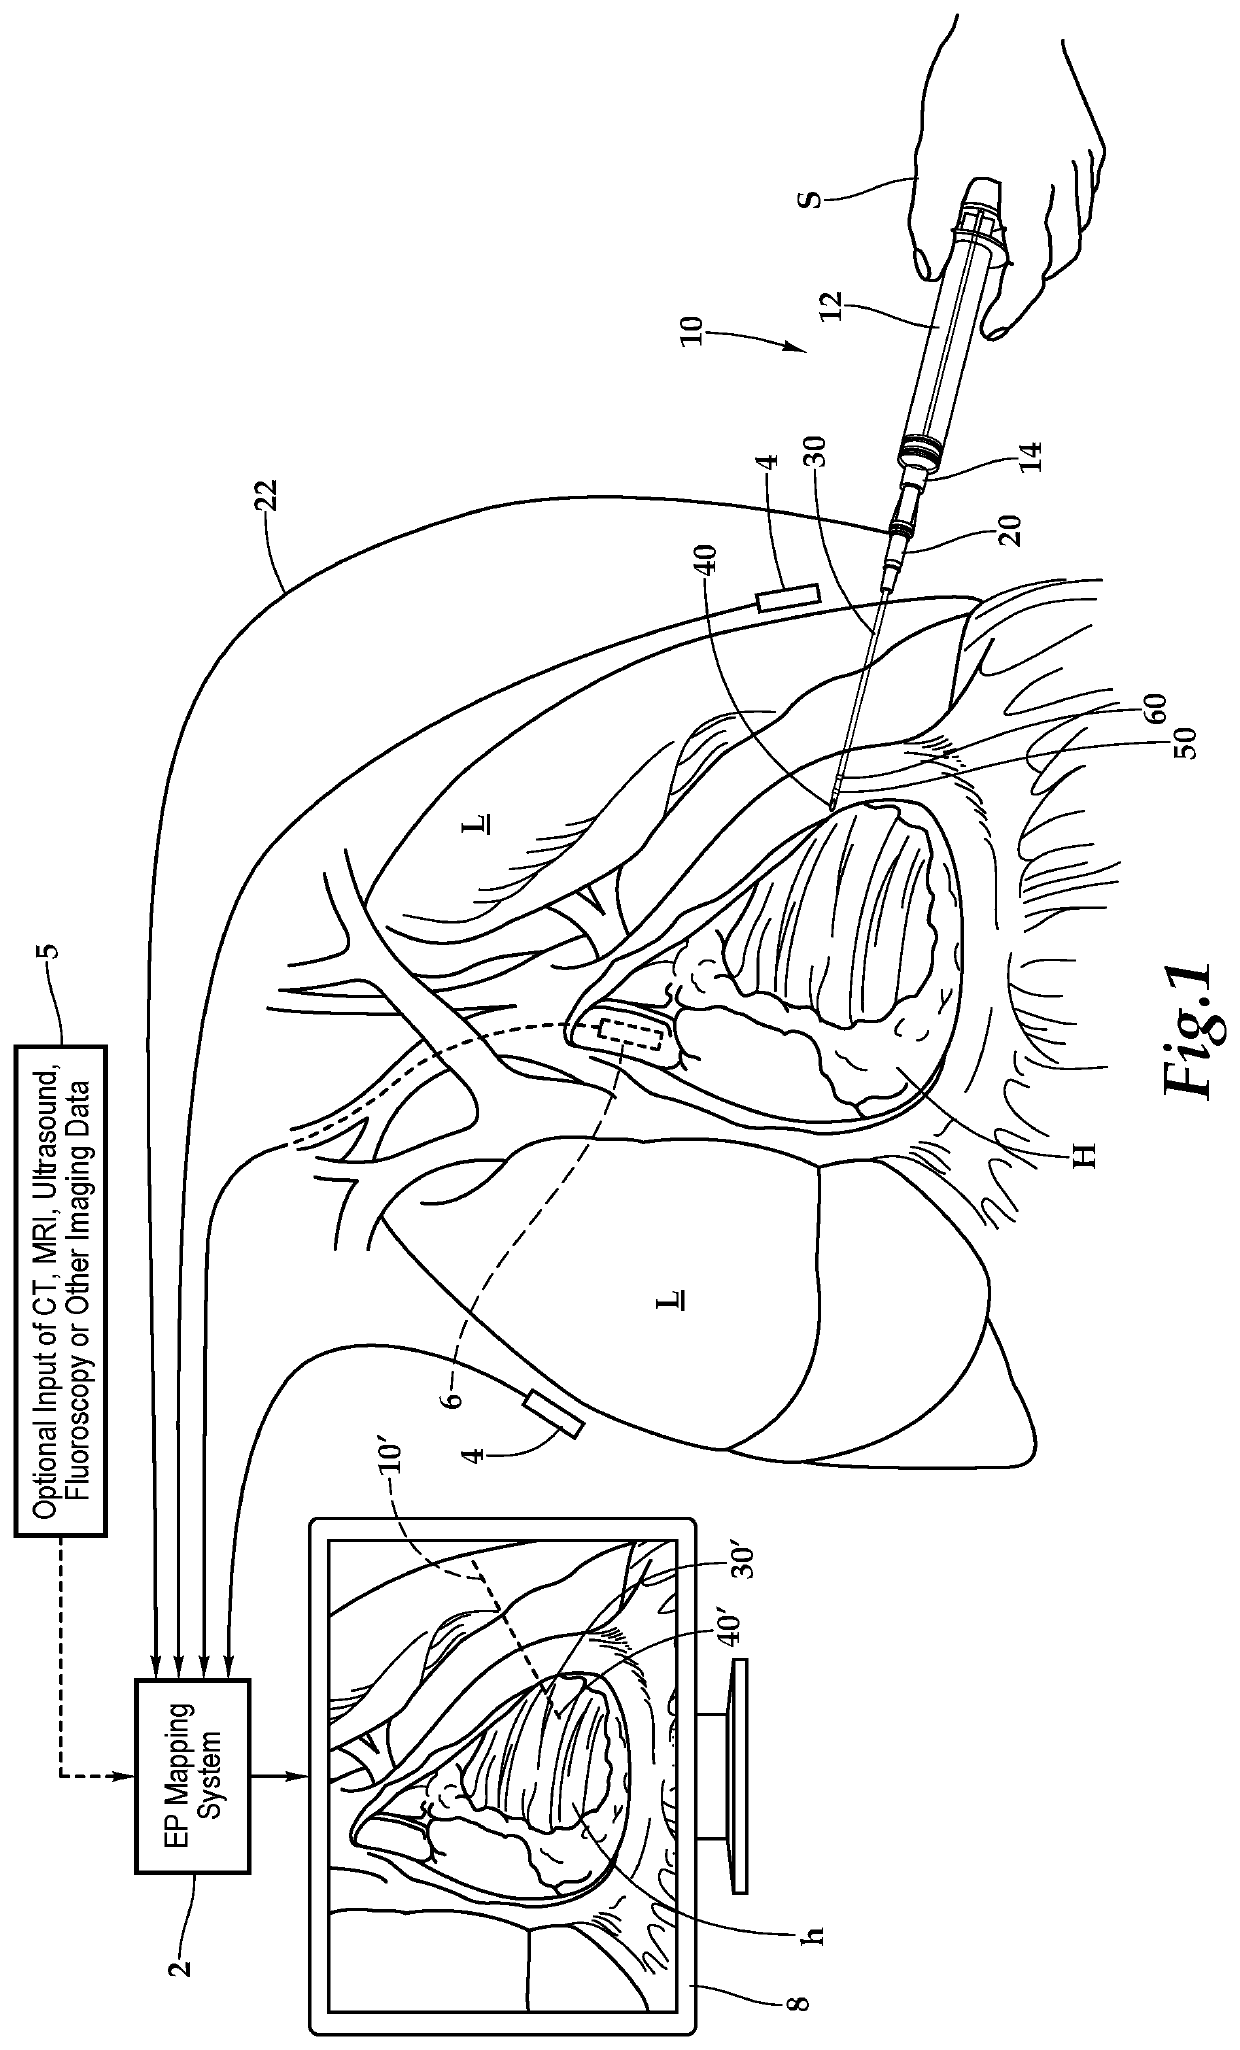 Pericardiocentesis needle guided by cardiac electrophysiology mapping